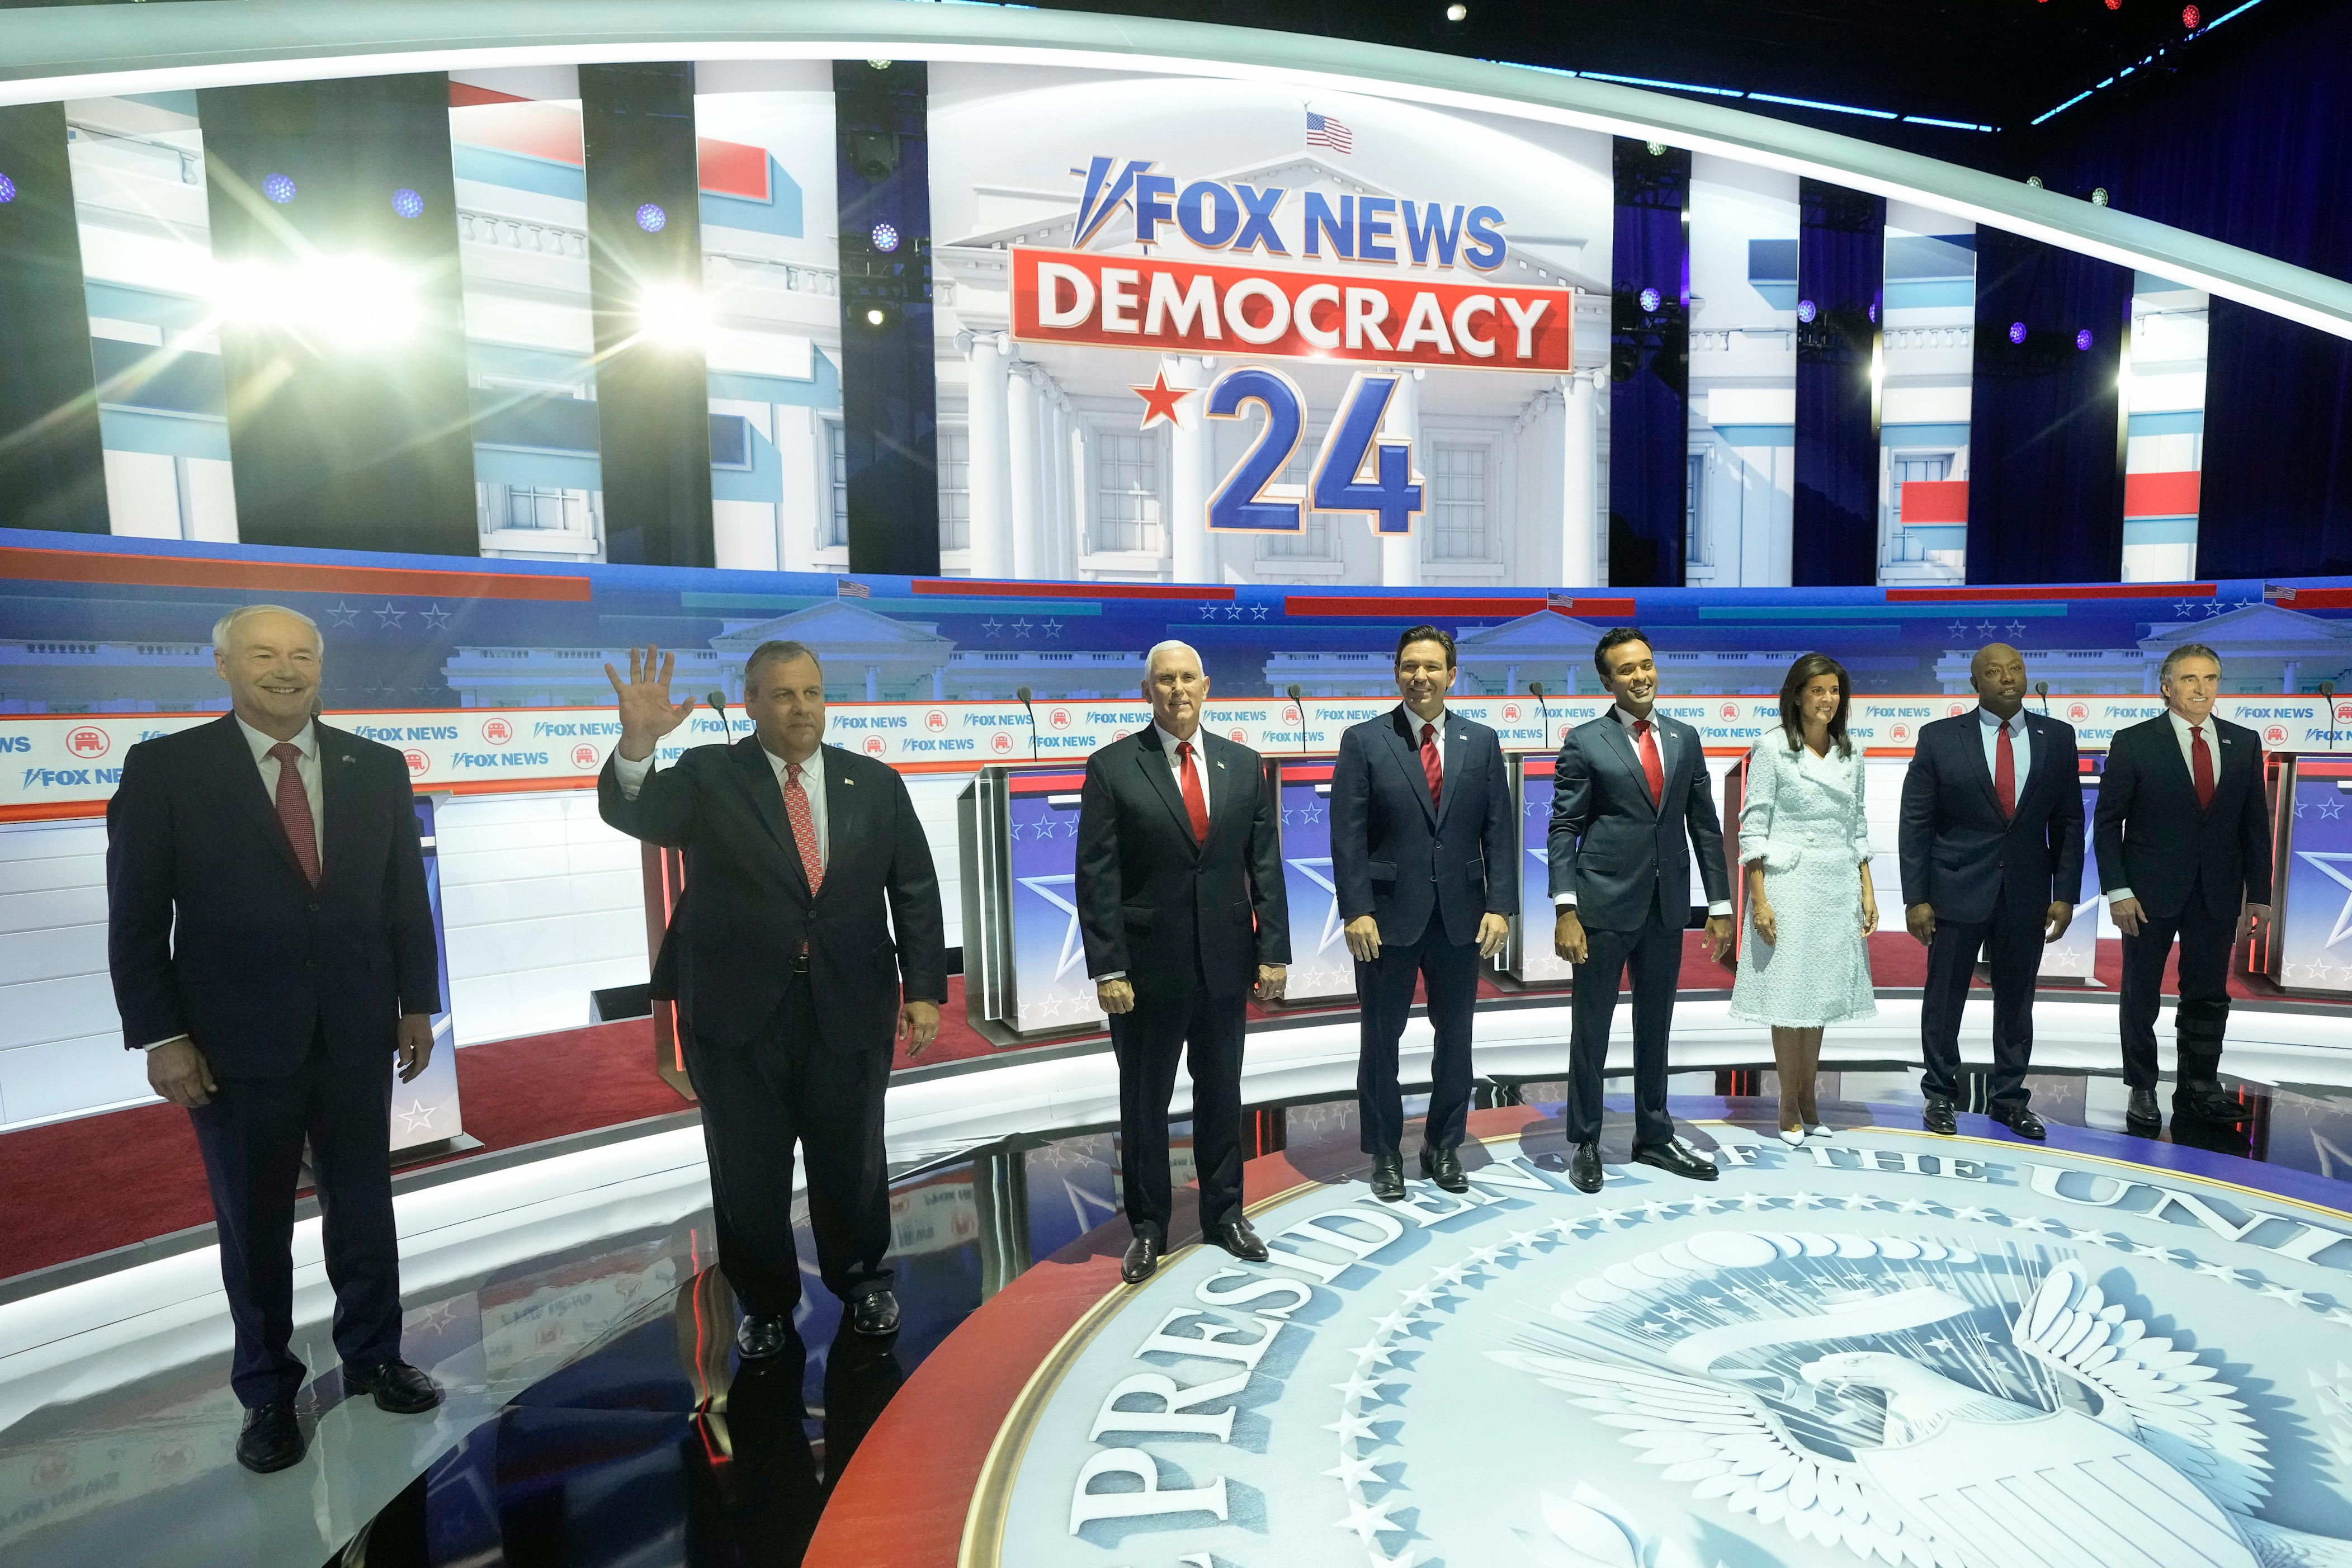 Who will be in the next Republican debate? Here's a look which 2024